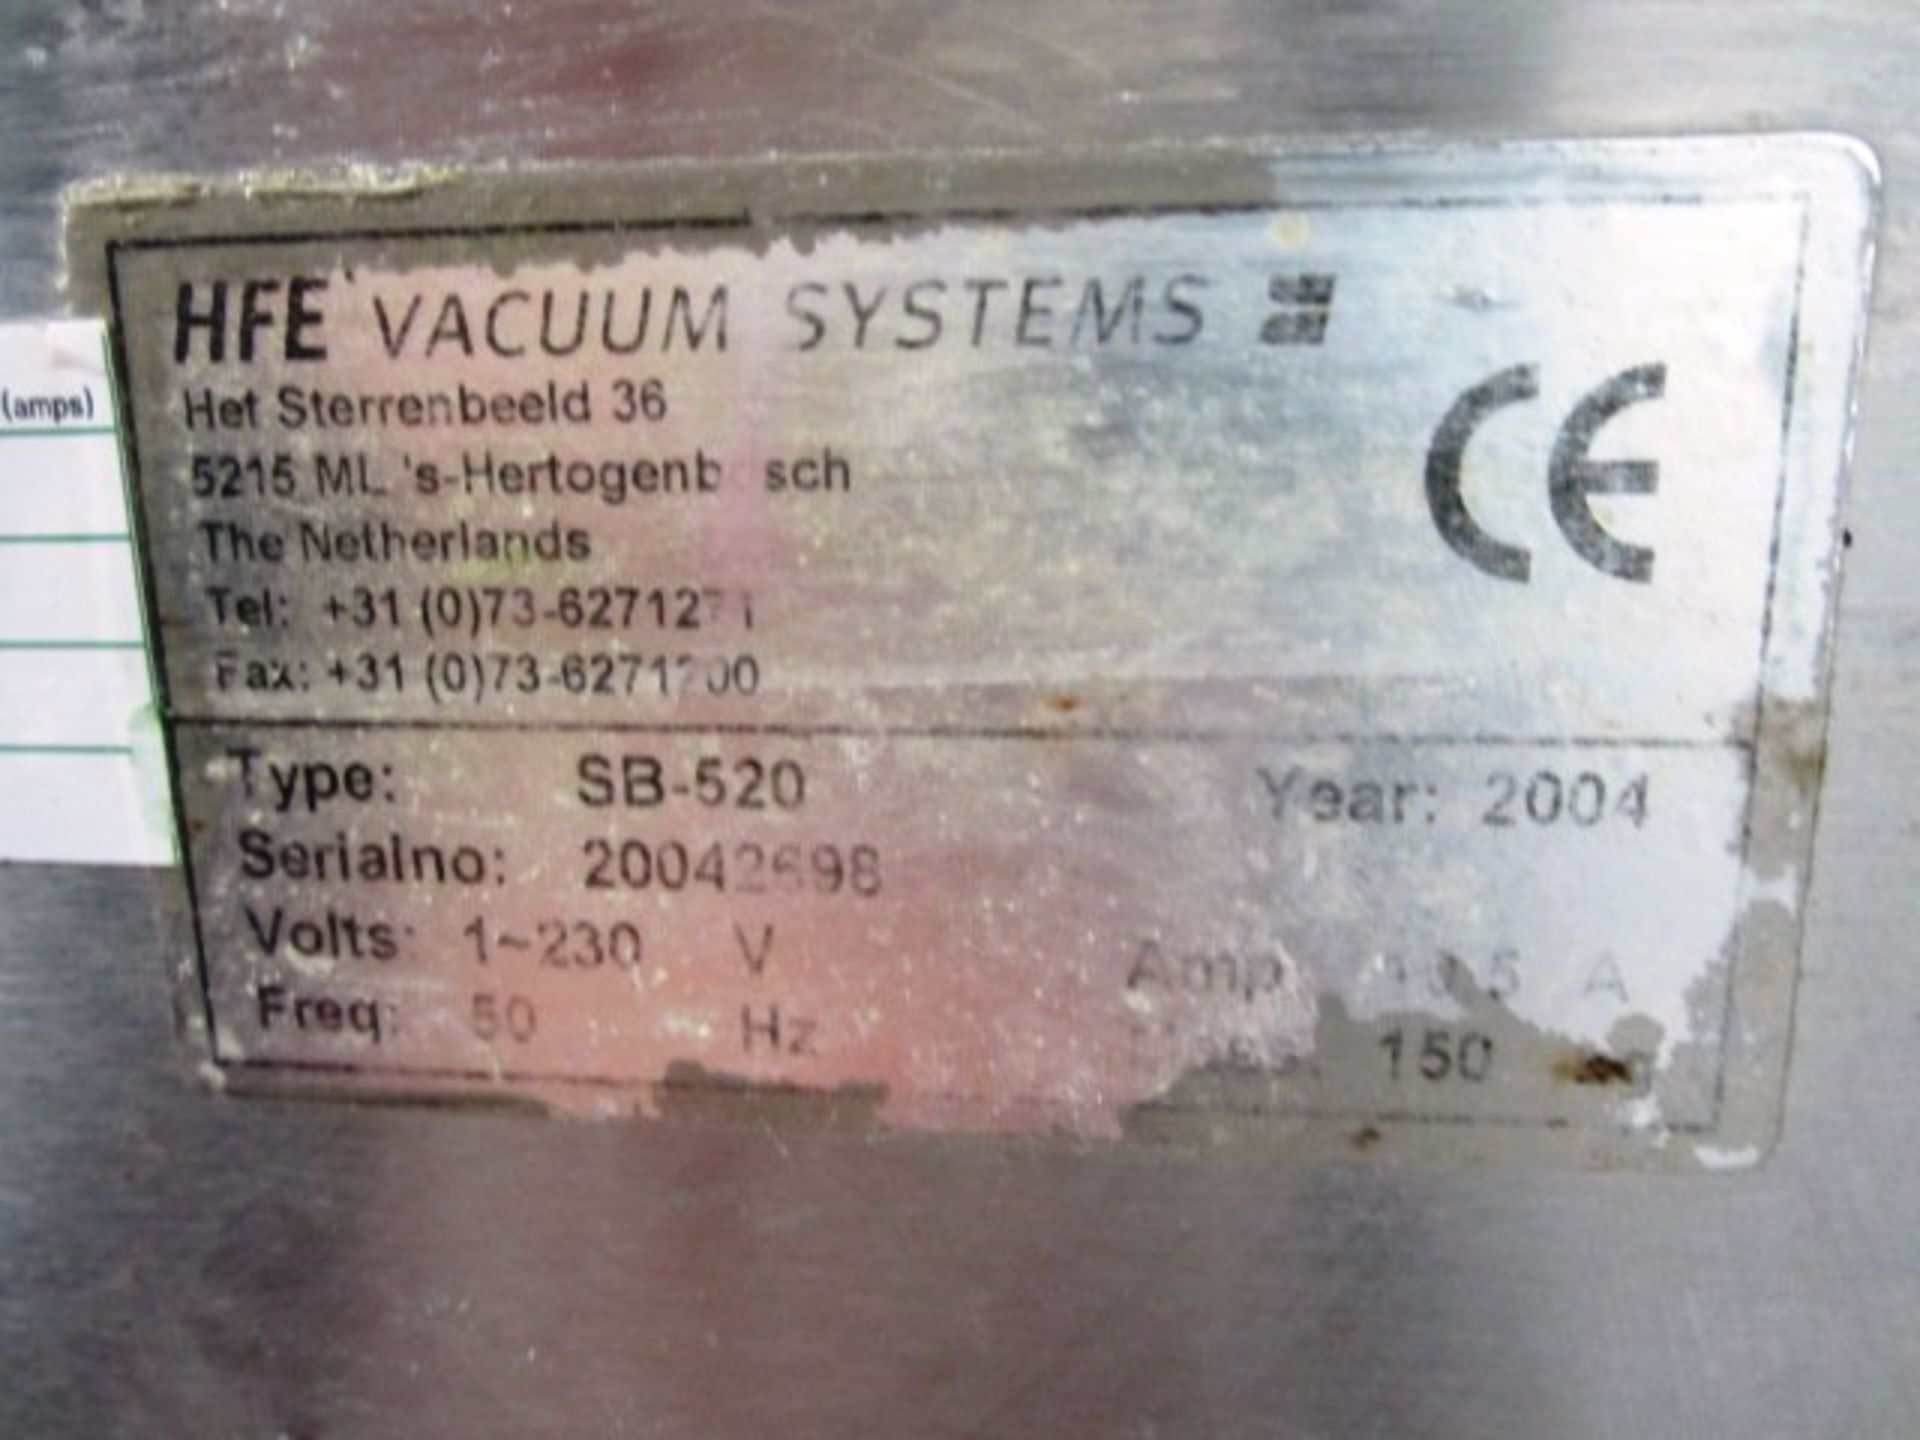 HFE Turbovac vacuum packer, 500 x 500mm chamber size, model 53-520, serial no. 20042096 (2004), - Image 4 of 4